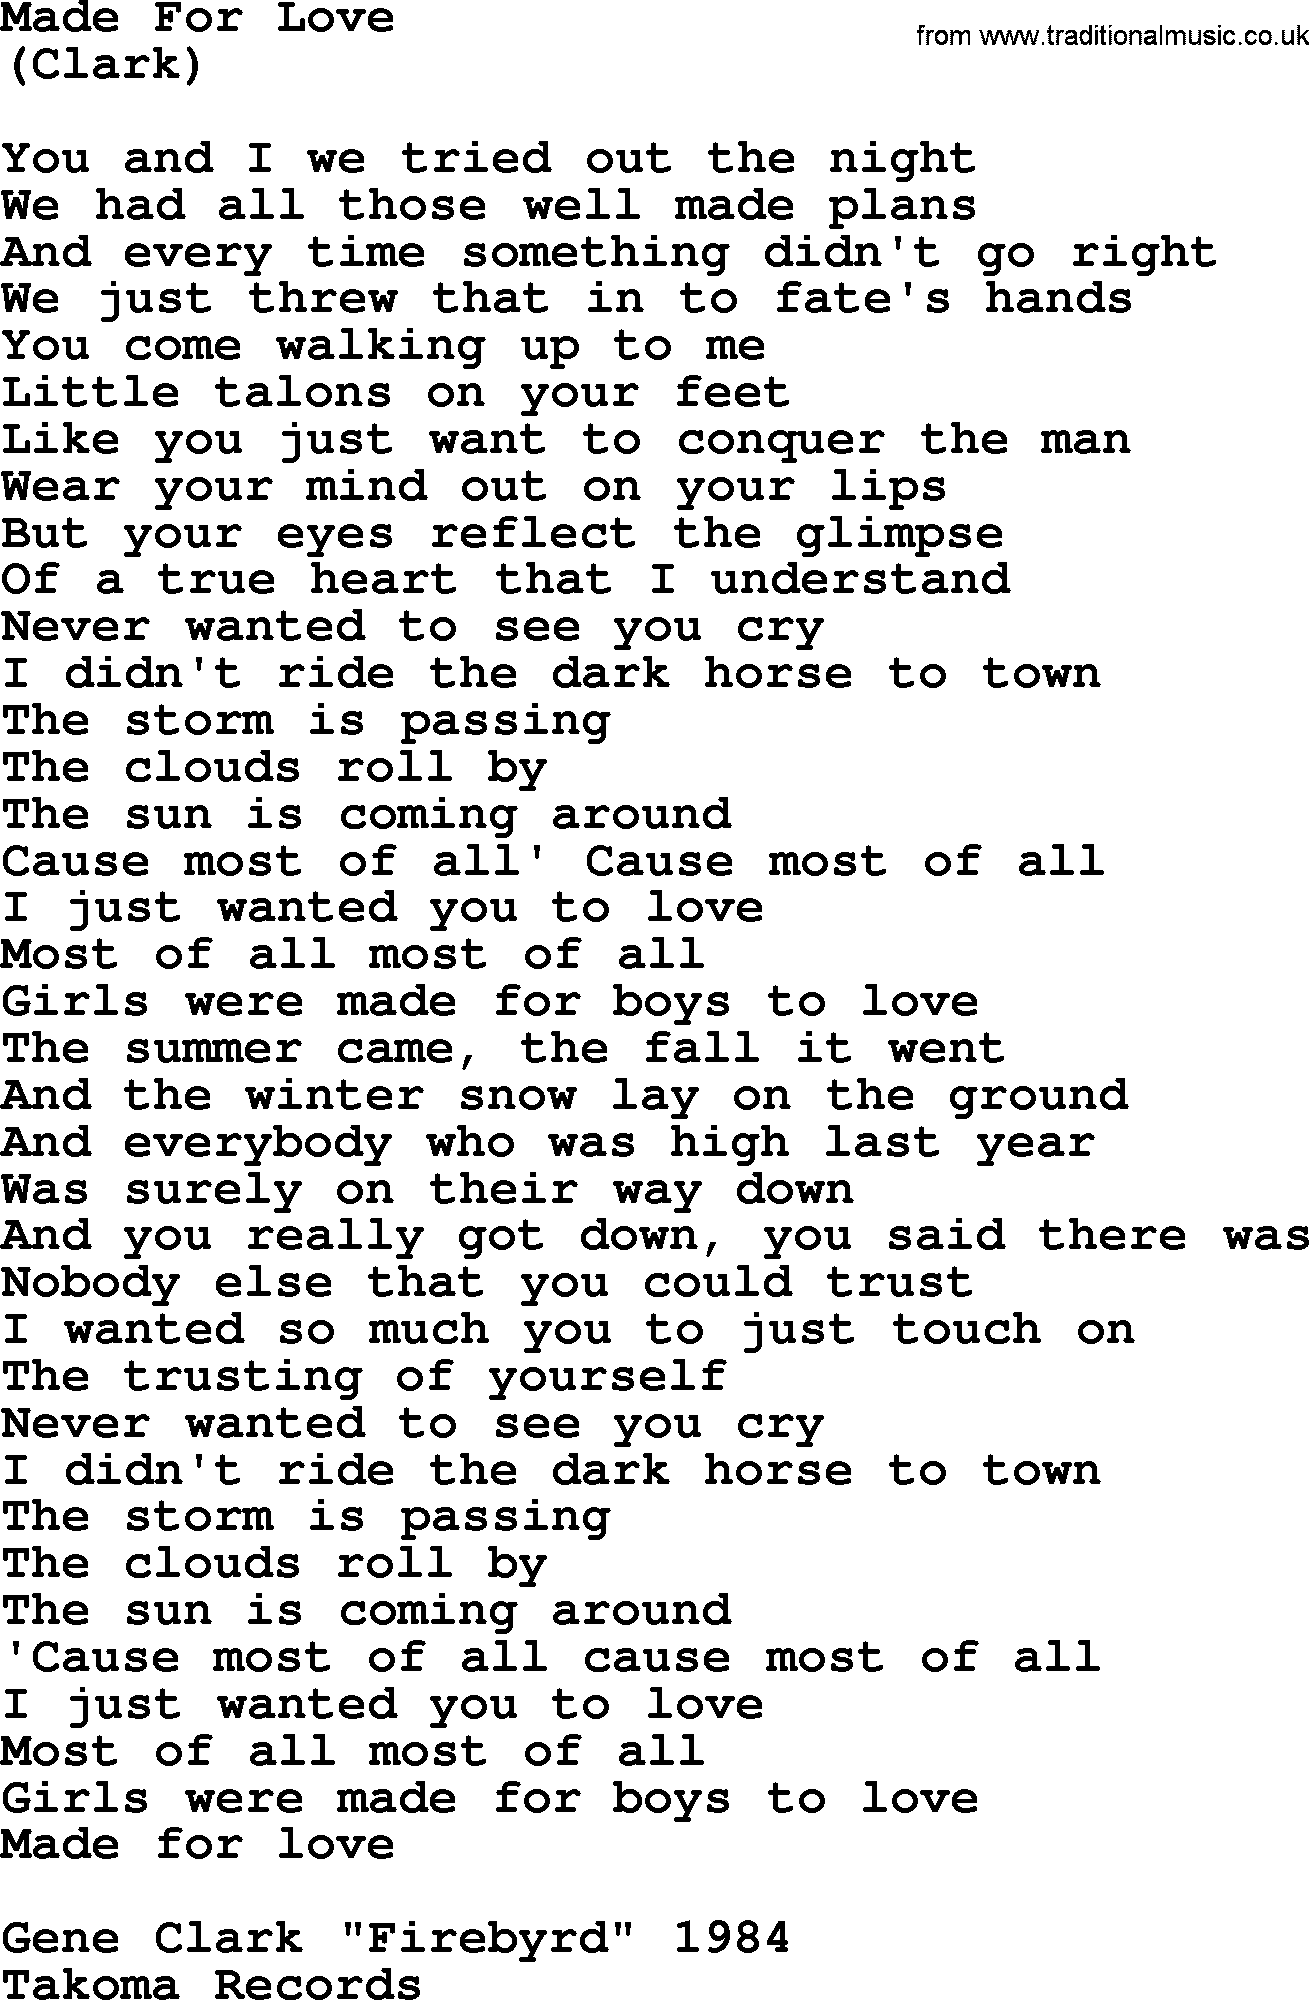 The Byrds song Made For Love, lyrics